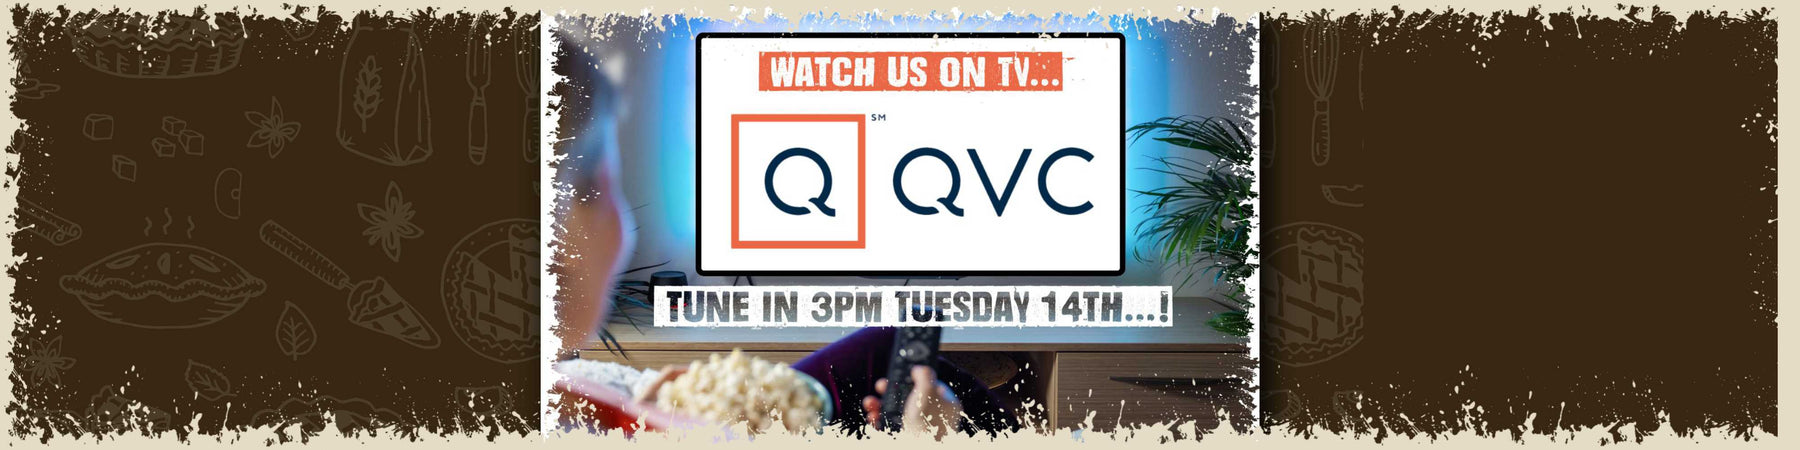 Tune in to QVC at 3pm on 14th May! 📺